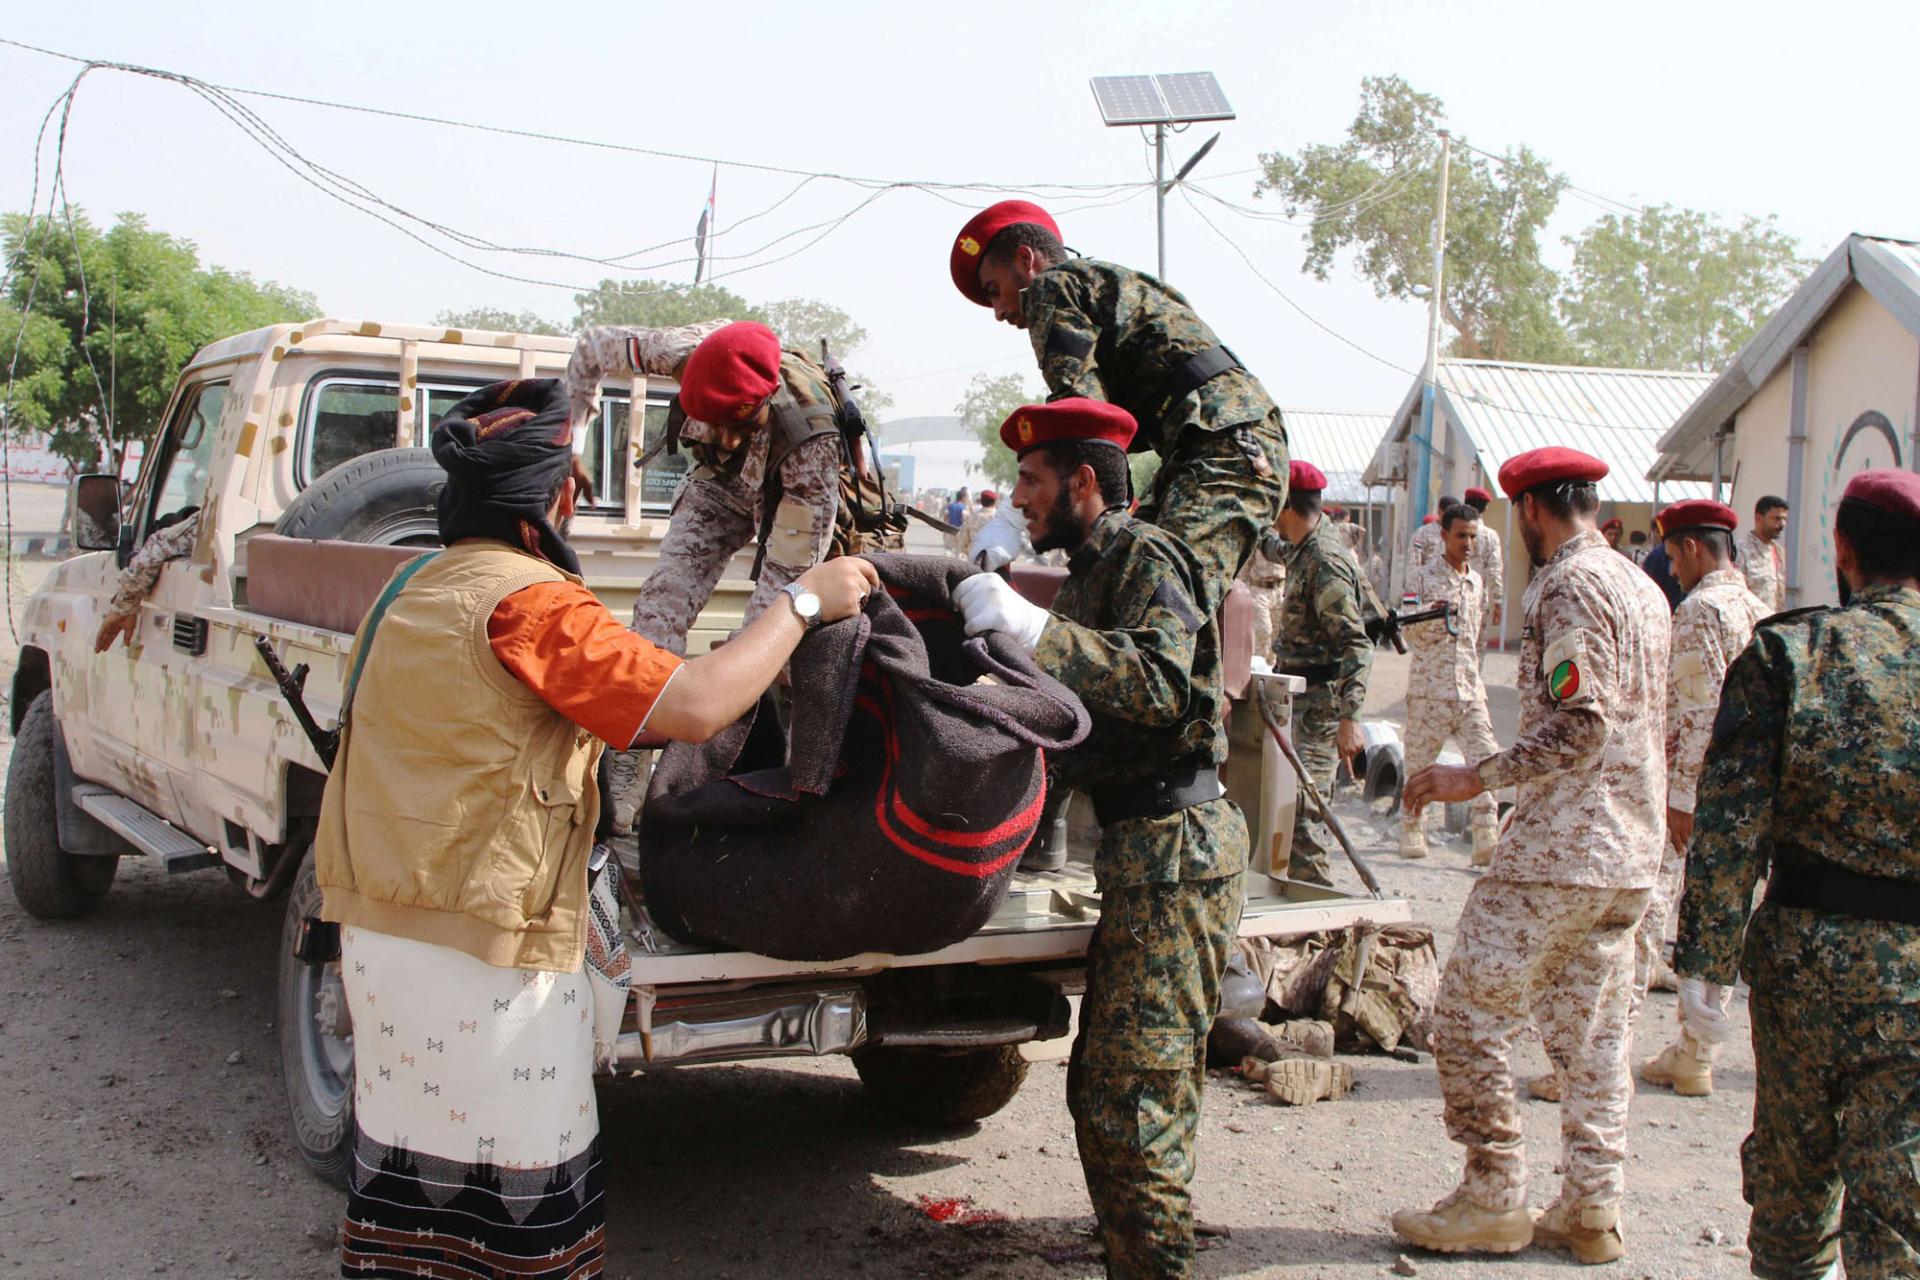 Aden is controlled by the Yemeni government and its supporters in a Saudi-led coalition